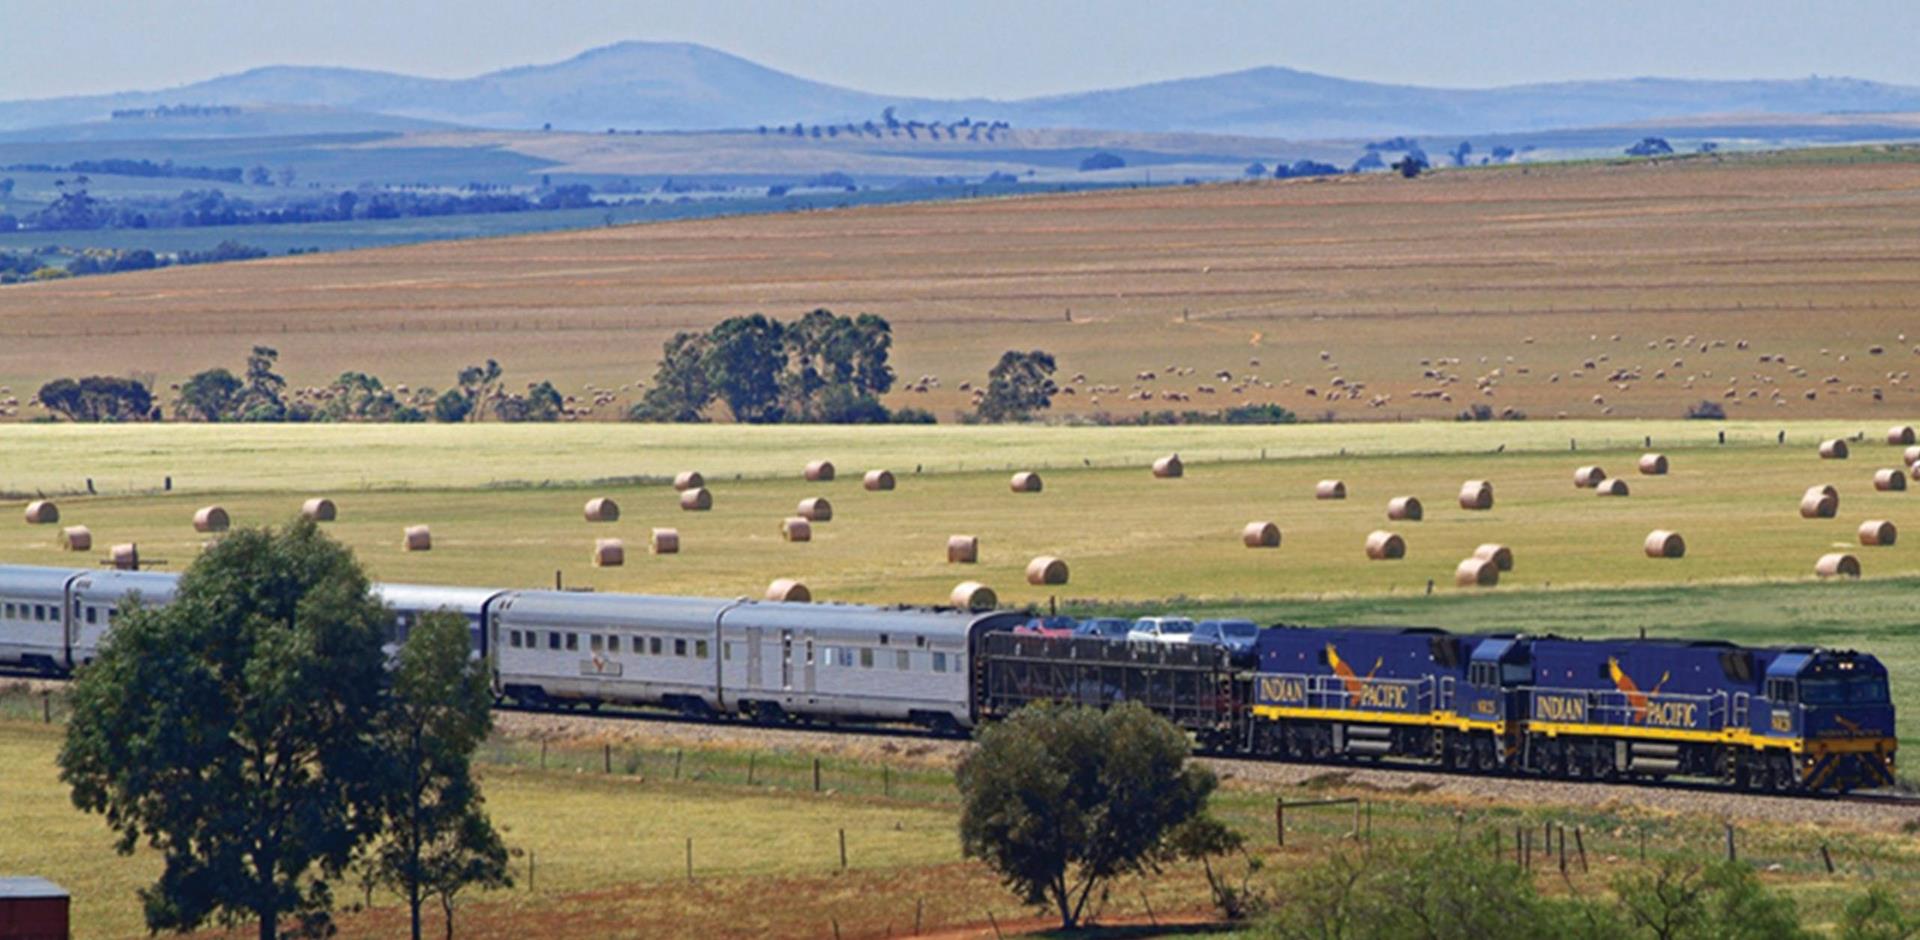 View from train, The Indian Pacific, Australia